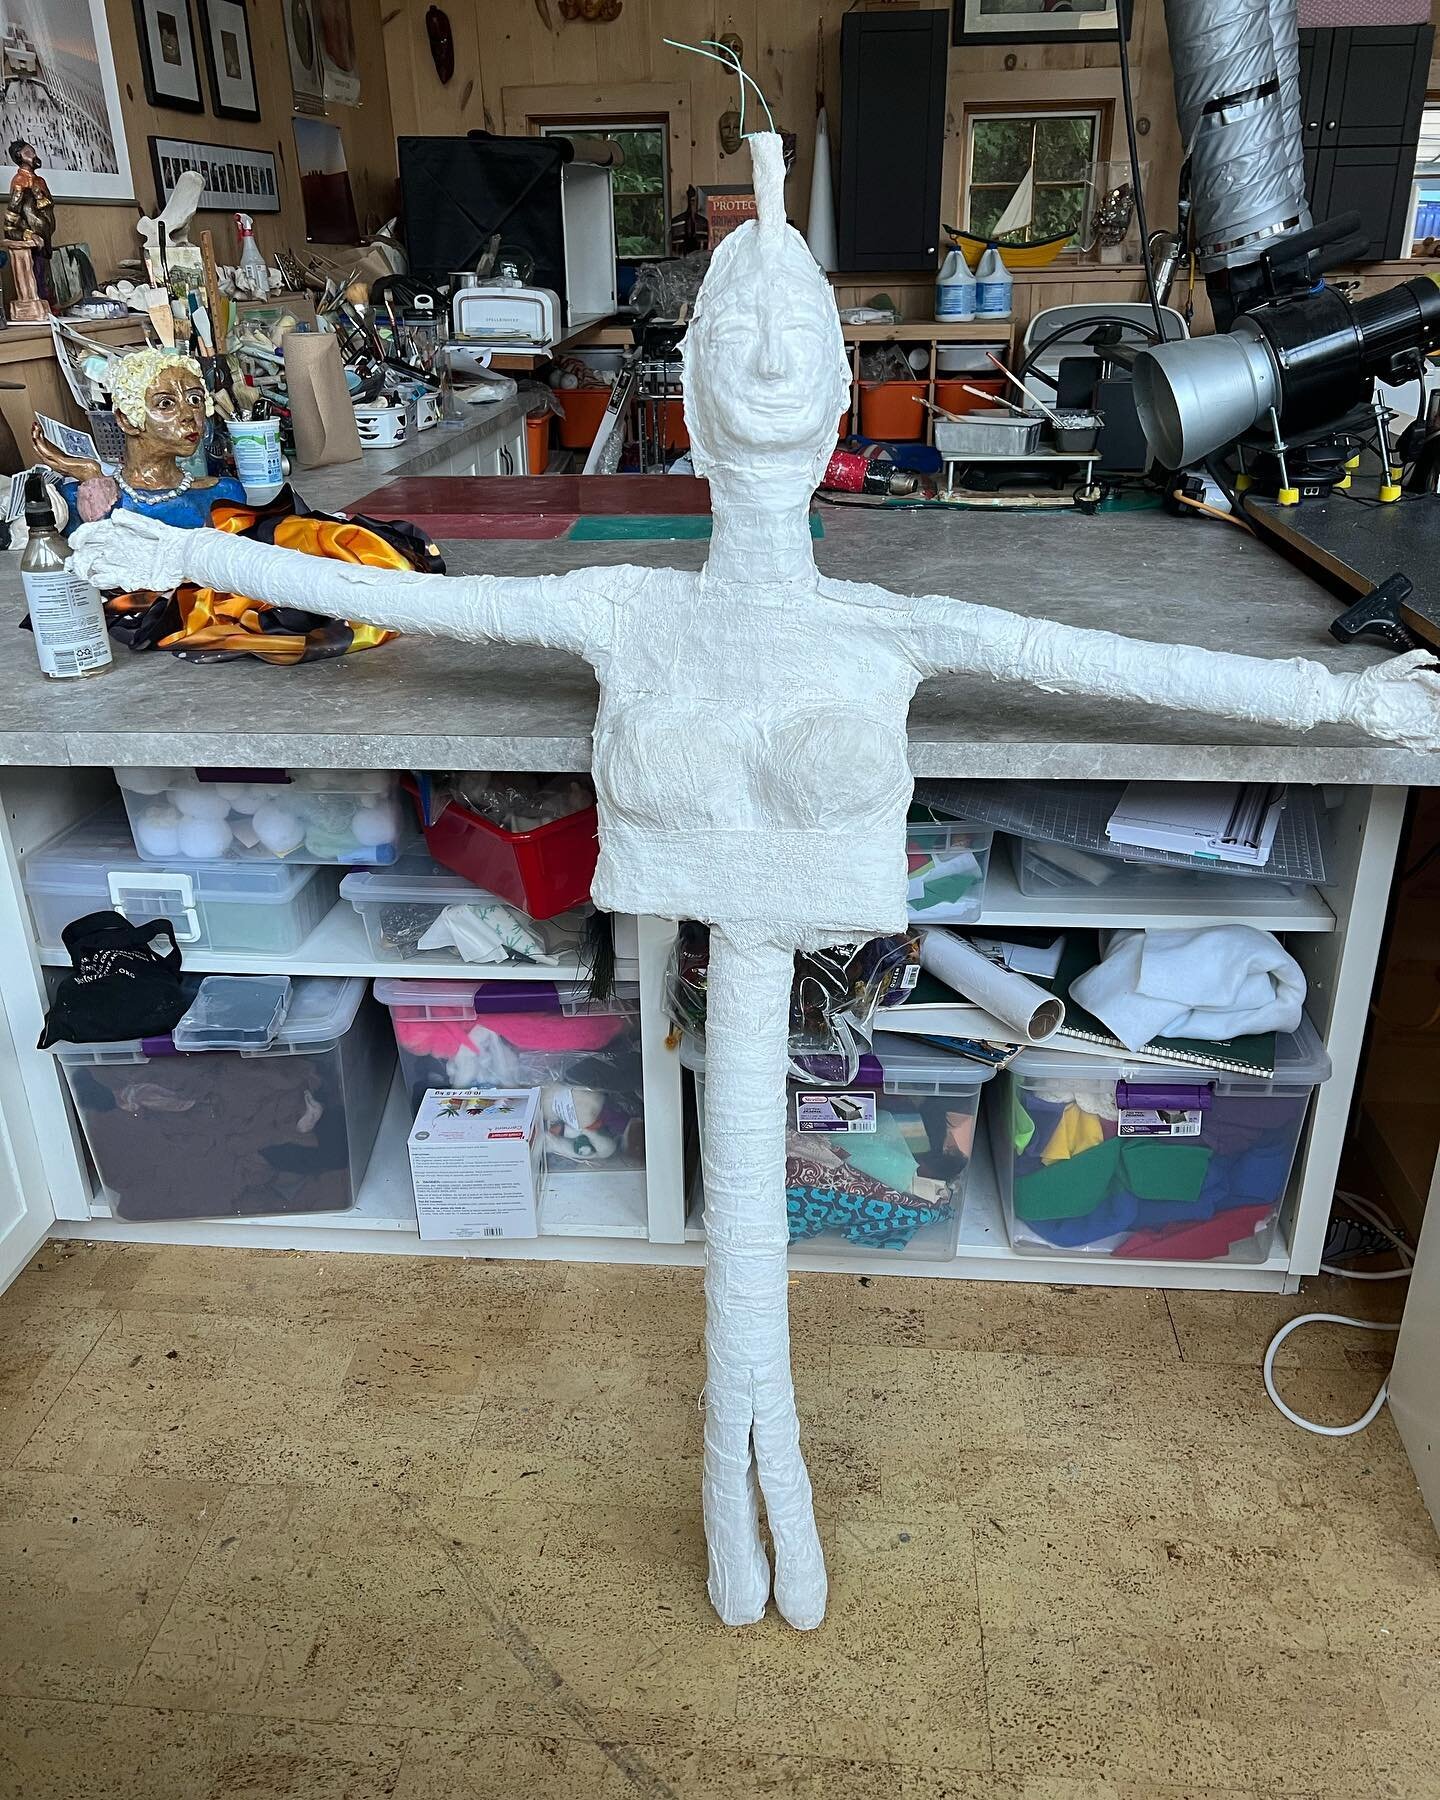 Just finished the beginning of a spirit woman. She is made of plaster a product I hate working with but had to keep this light. What she becomes you will have to wait for the finished sculpture #photographersworkroomvt -workroom #sculpture